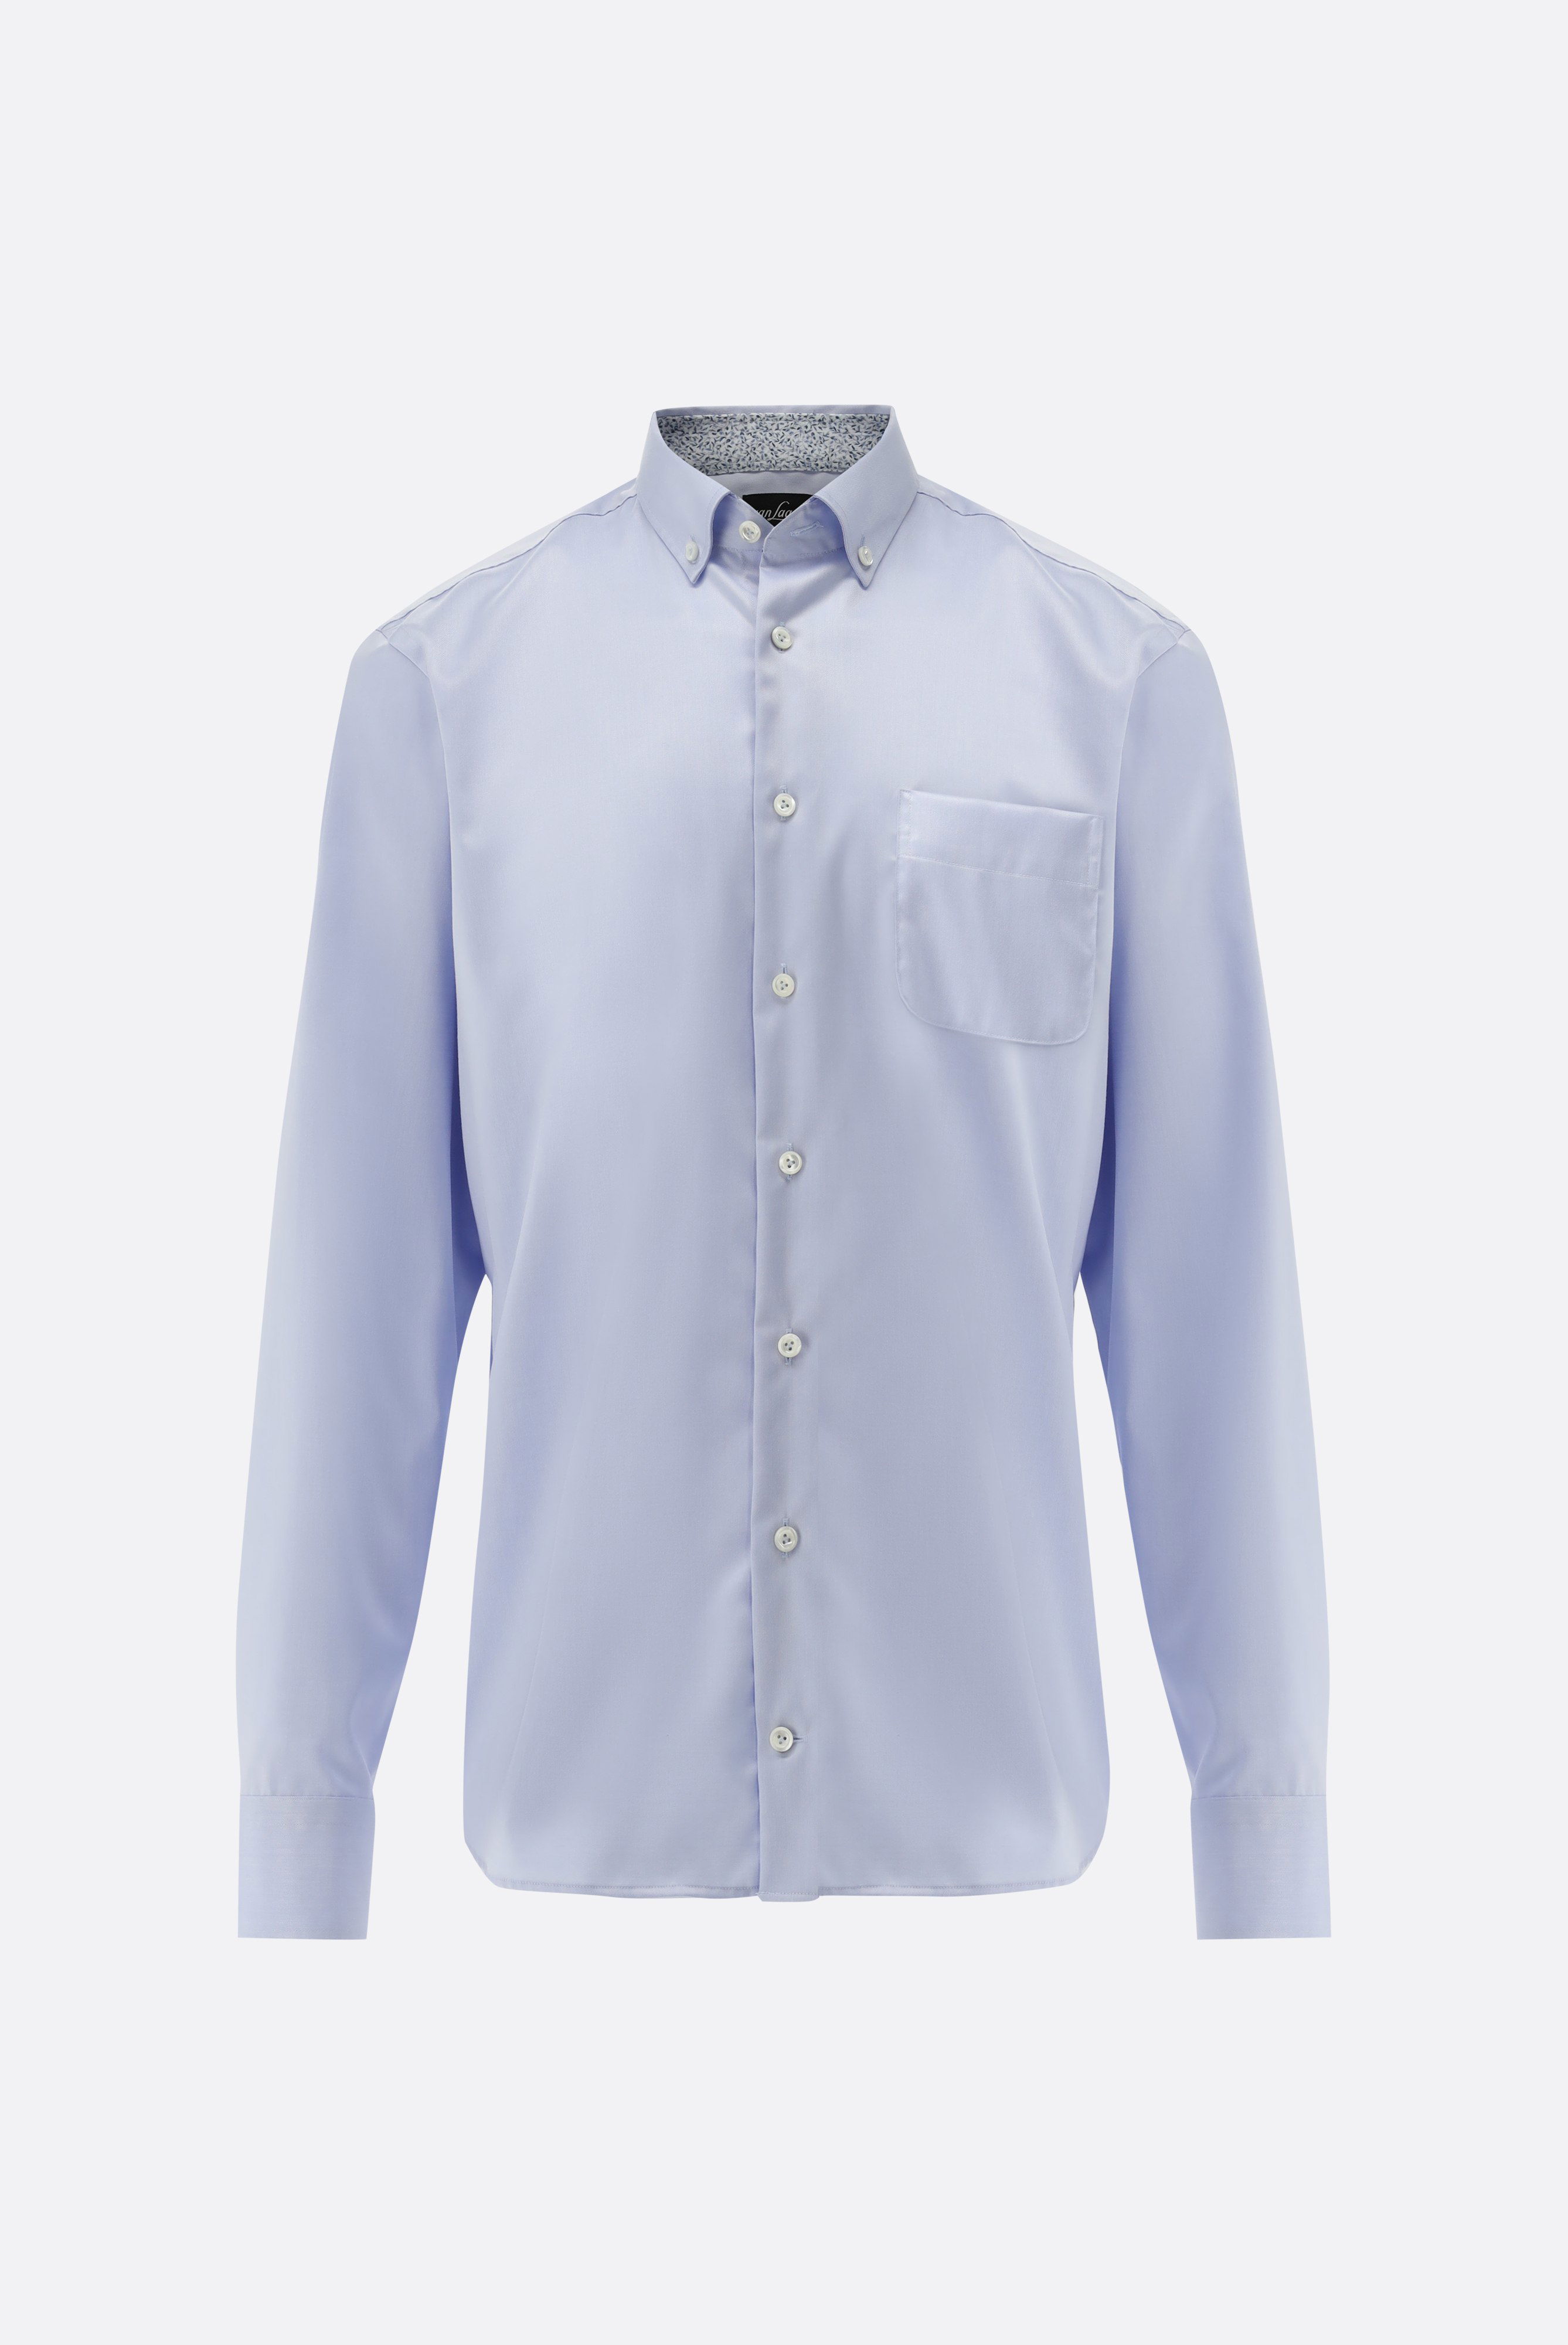 Wrinkle free shirt with a contrast tailor fit